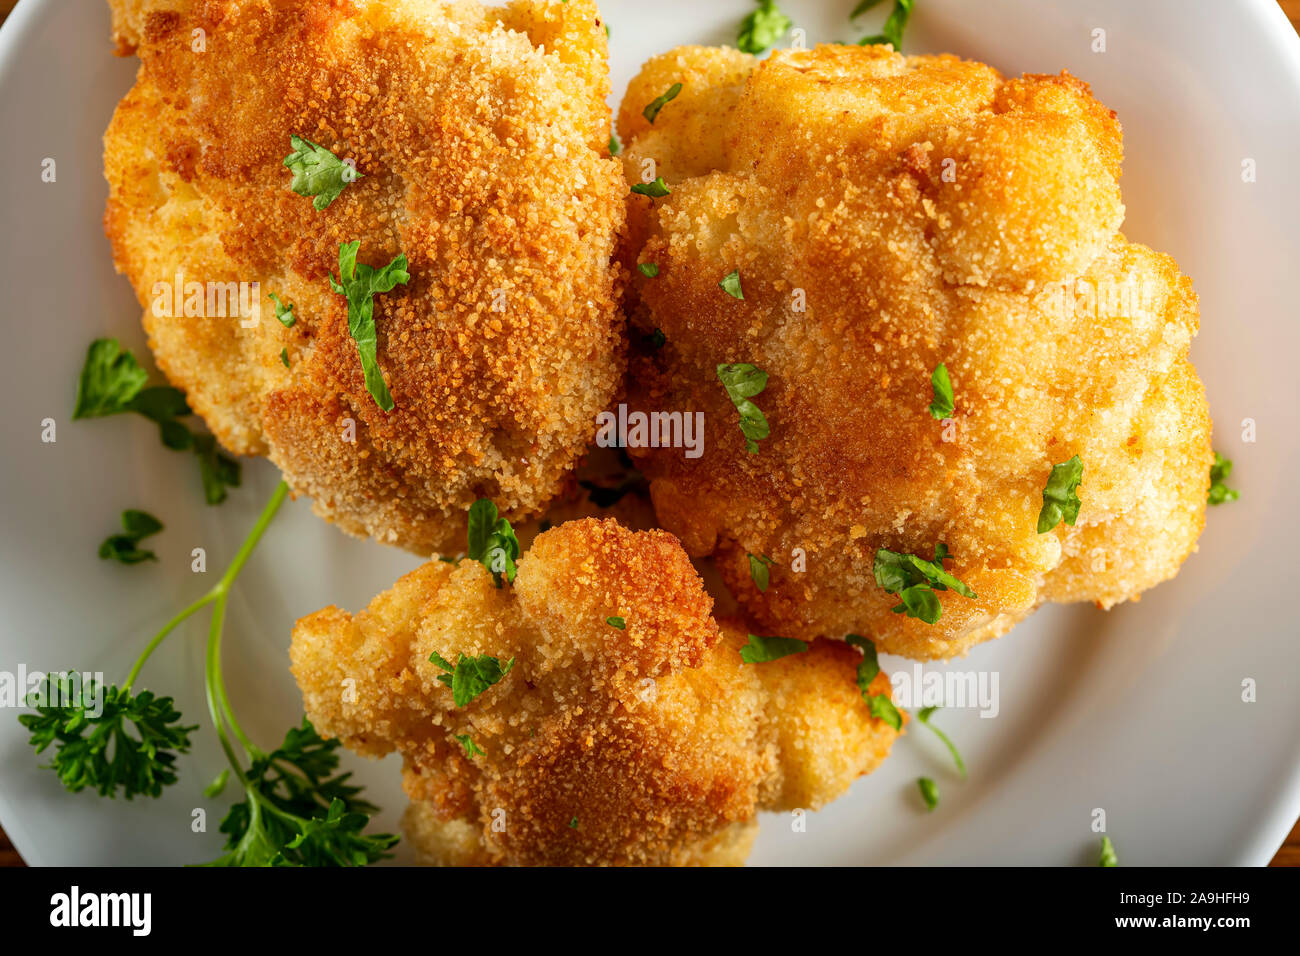 Cauliflower fried on plate with chopped parsley Stock Photo